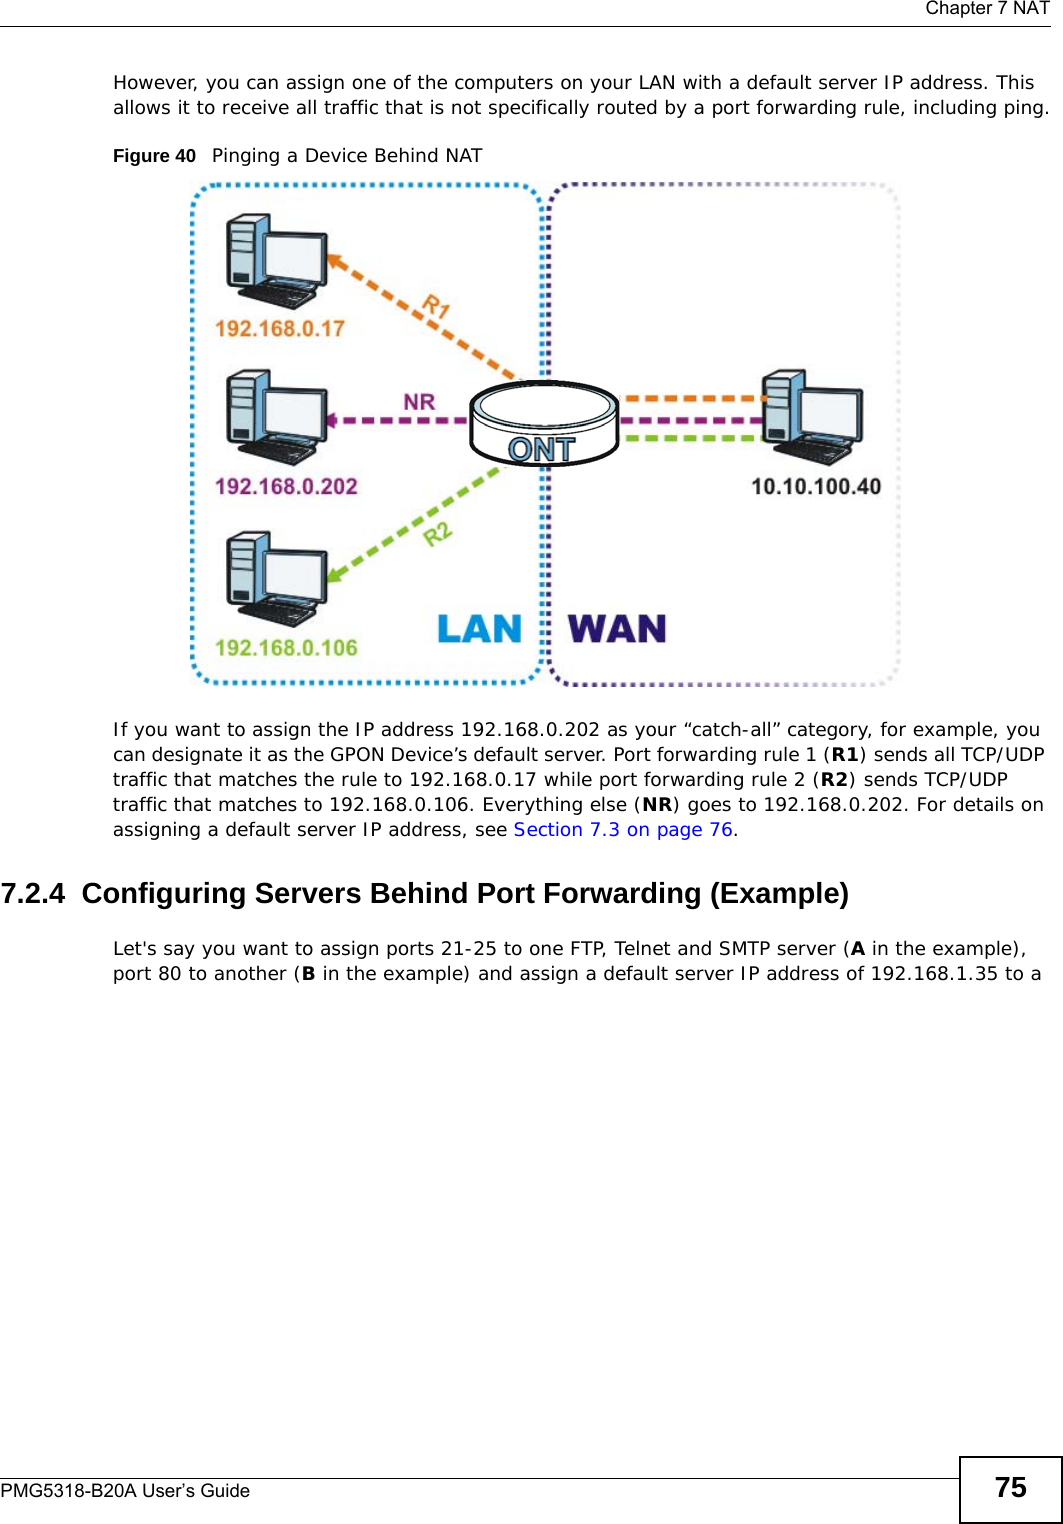  Chapter 7 NATPMG5318-B20A User’s Guide 75However, you can assign one of the computers on your LAN with a default server IP address. This allows it to receive all traffic that is not specifically routed by a port forwarding rule, including ping.Figure 40   Pinging a Device Behind NATIf you want to assign the IP address 192.168.0.202 as your “catch-all” category, for example, you can designate it as the GPON Device’s default server. Port forwarding rule 1 (R1) sends all TCP/UDP traffic that matches the rule to 192.168.0.17 while port forwarding rule 2 (R2) sends TCP/UDP traffic that matches to 192.168.0.106. Everything else (NR) goes to 192.168.0.202. For details on assigning a default server IP address, see Section 7.3 on page 76.7.2.4  Configuring Servers Behind Port Forwarding (Example)Let&apos;s say you want to assign ports 21-25 to one FTP, Telnet and SMTP server (A in the example), port 80 to another (B in the example) and assign a default server IP address of 192.168.1.35 to a 